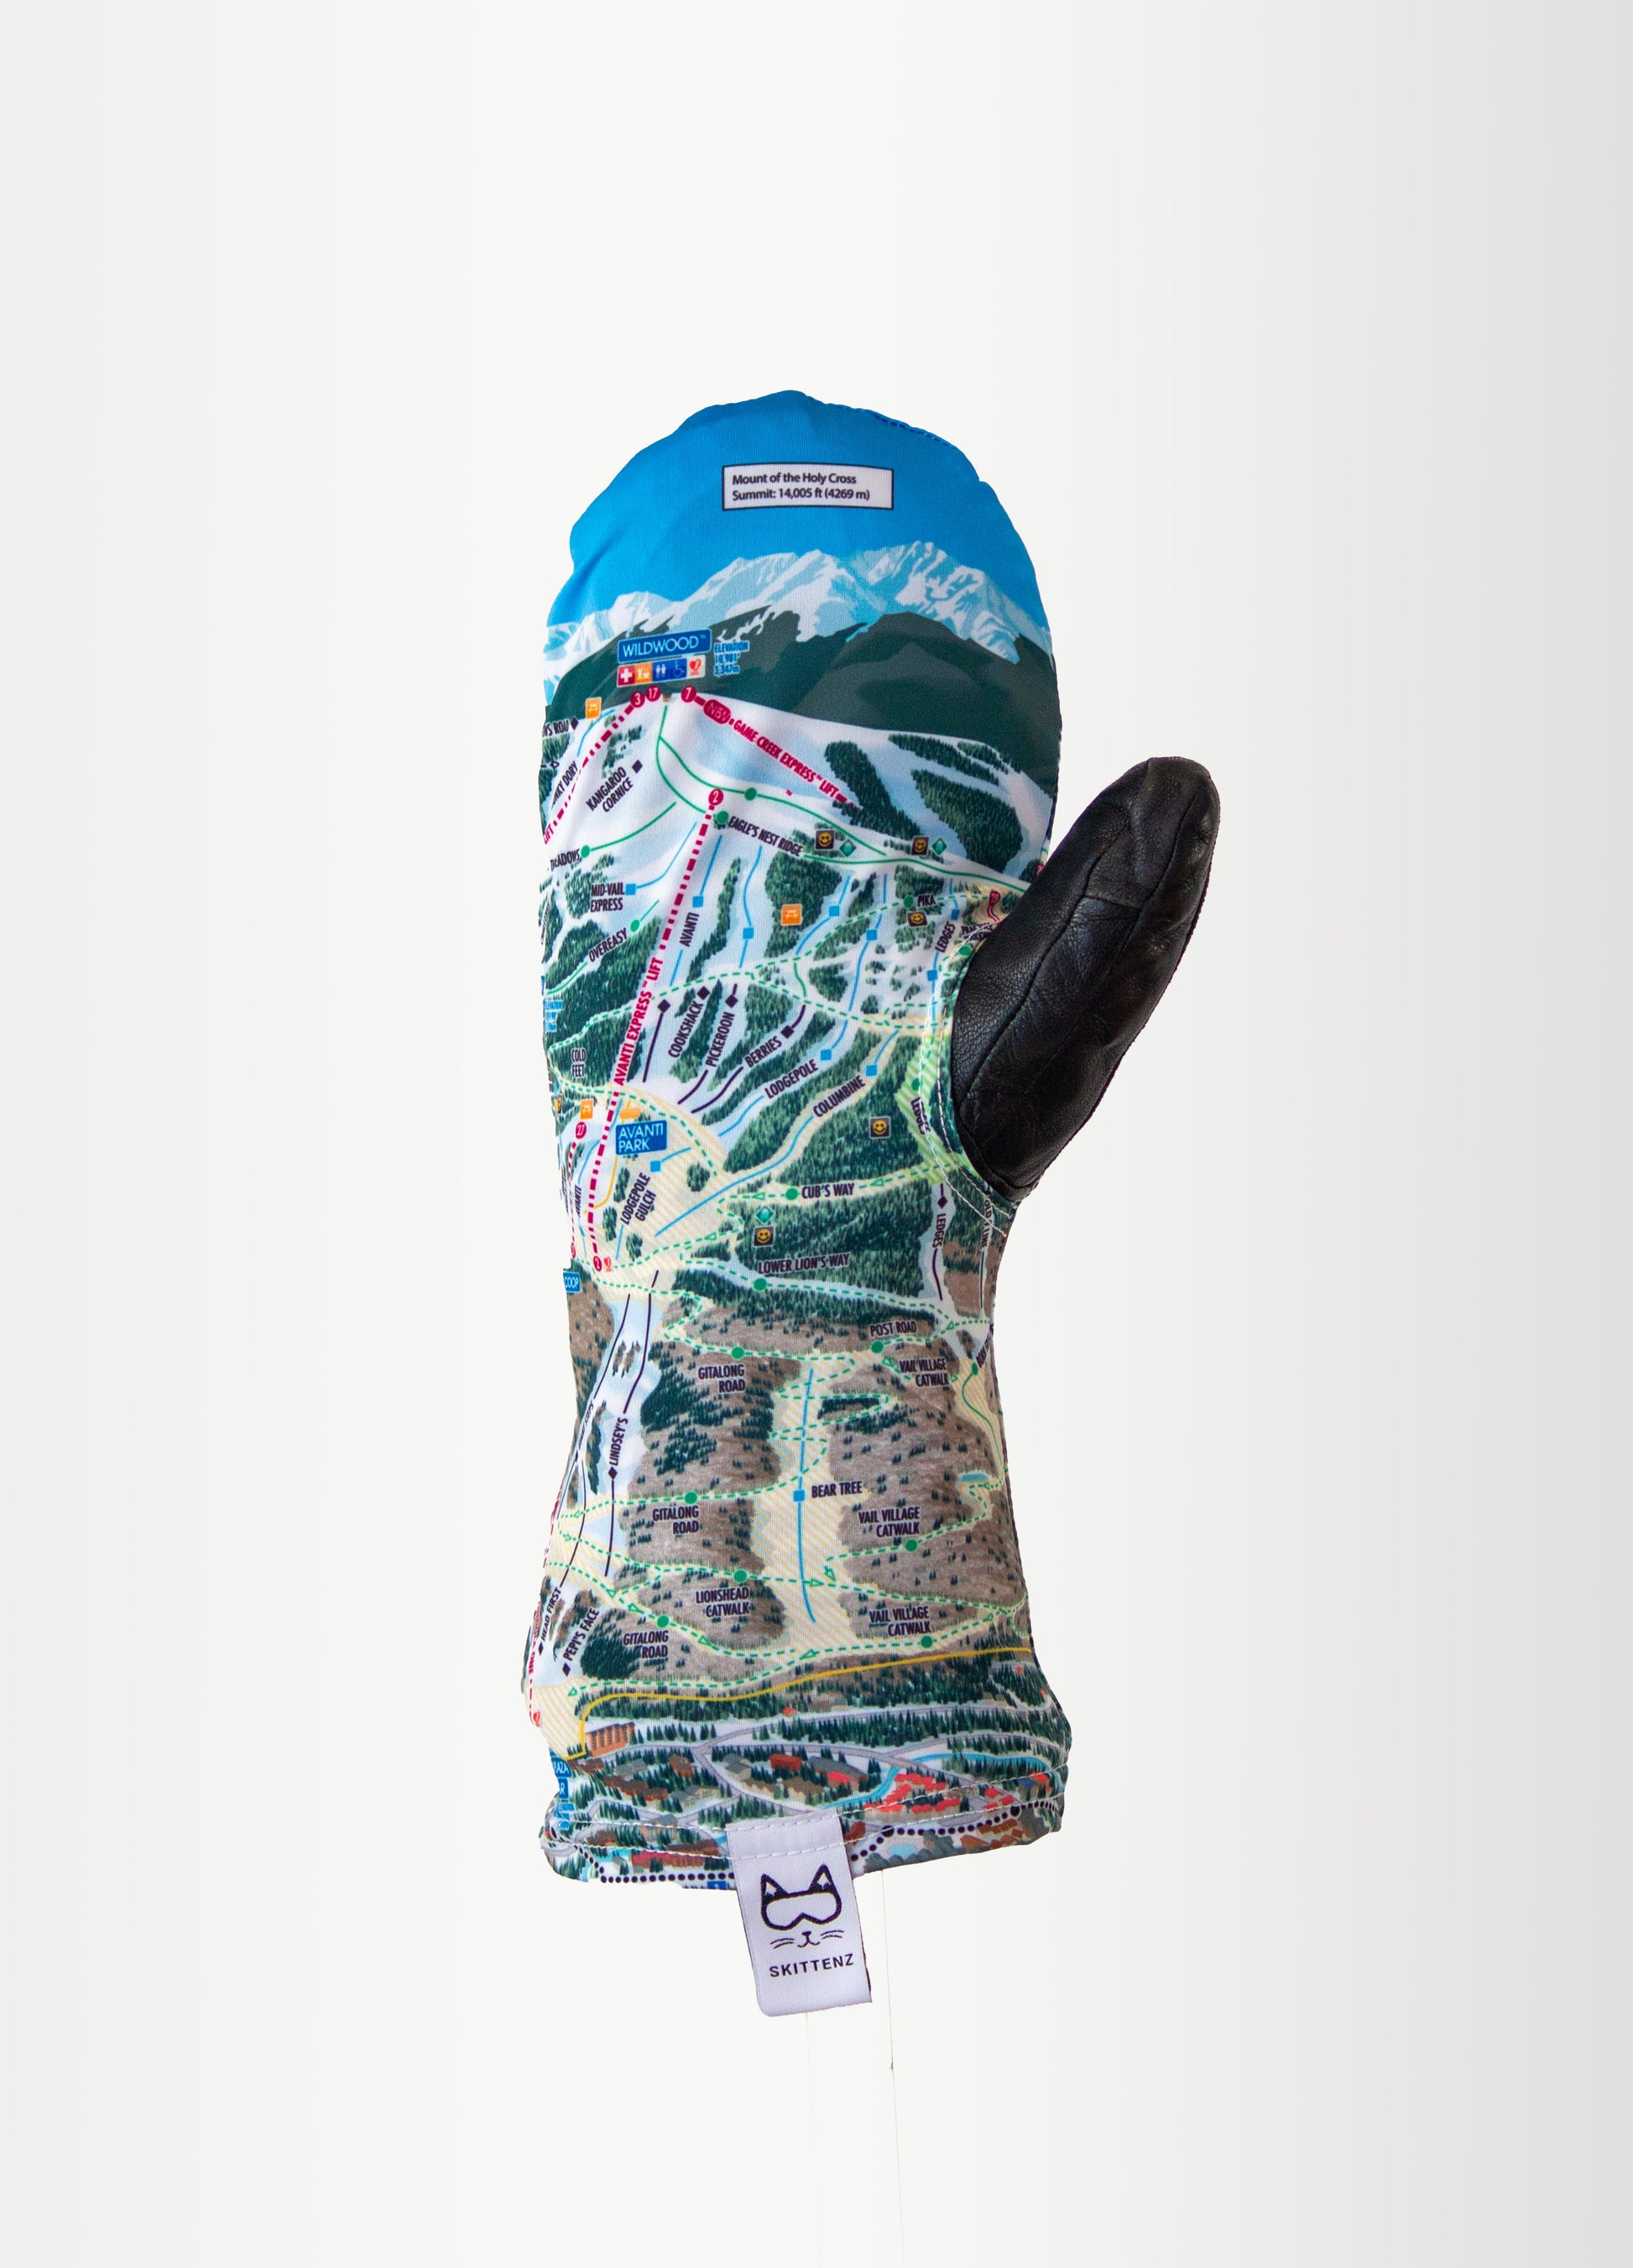 Vail Ski or Snowboard Trail Map Skins for Mittens or Gloves